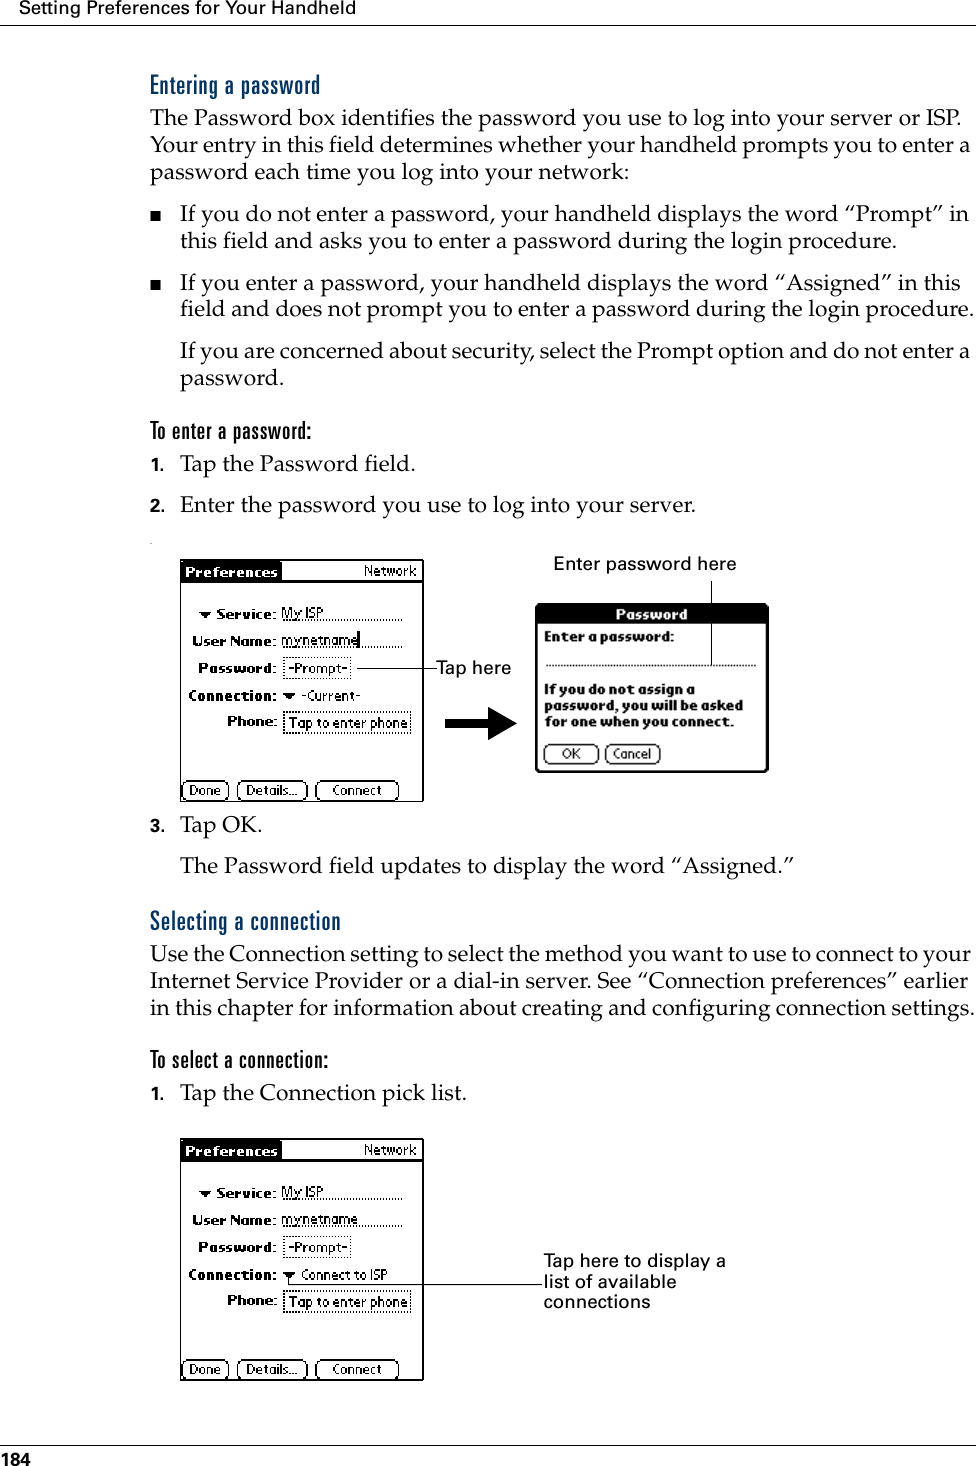 Setting Preferences for Your Handheld184Entering a passwordThe Password box identifies the password you use to log into your server or ISP. Your entry in this field determines whether your handheld prompts you to enter a password each time you log into your network:■If you do not enter a password, your handheld displays the word “Prompt” in this field and asks you to enter a password during the login procedure. ■If you enter a password, your handheld displays the word “Assigned” in this field and does not prompt you to enter a password during the login procedure.If you are concerned about security, select the Prompt option and do not enter a password.To enter a password:1. Tap the Password field.2. Enter the password you use to log into your server..3. Tap OK. The Password field updates to display the word “Assigned.”Selecting a connectionUse the Connection setting to select the method you want to use to connect to your Internet Service Provider or a dial-in server. See “Connection preferences” earlier in this chapter for information about creating and configuring connection settings.To select a connection:1. Tap the Connection pick list.Enter password hereTa p  h e r eTap here to display a list of available connections